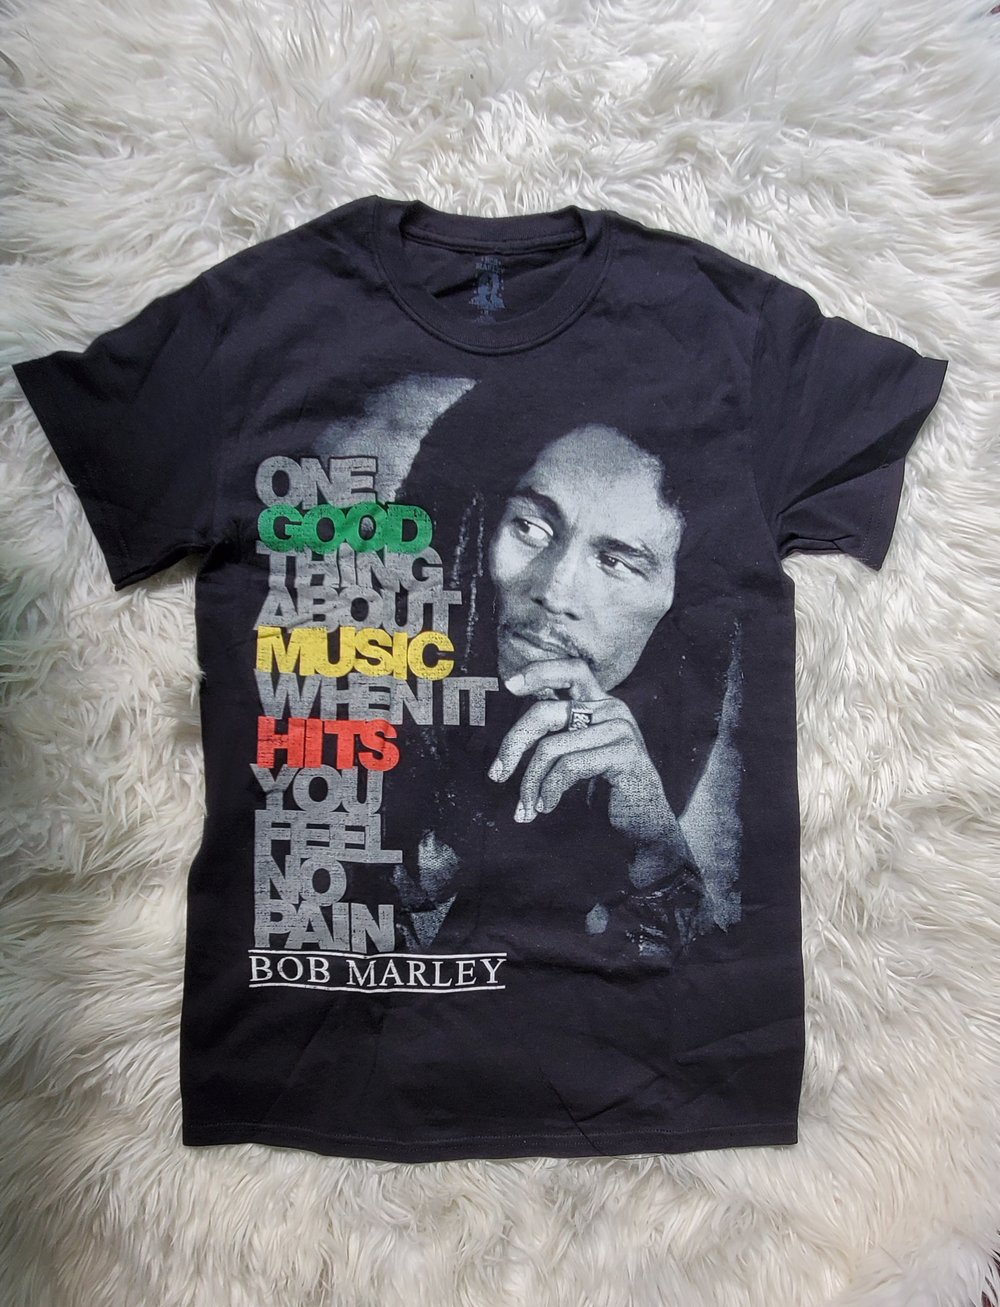 One Good thing about music Bob Marley shirt